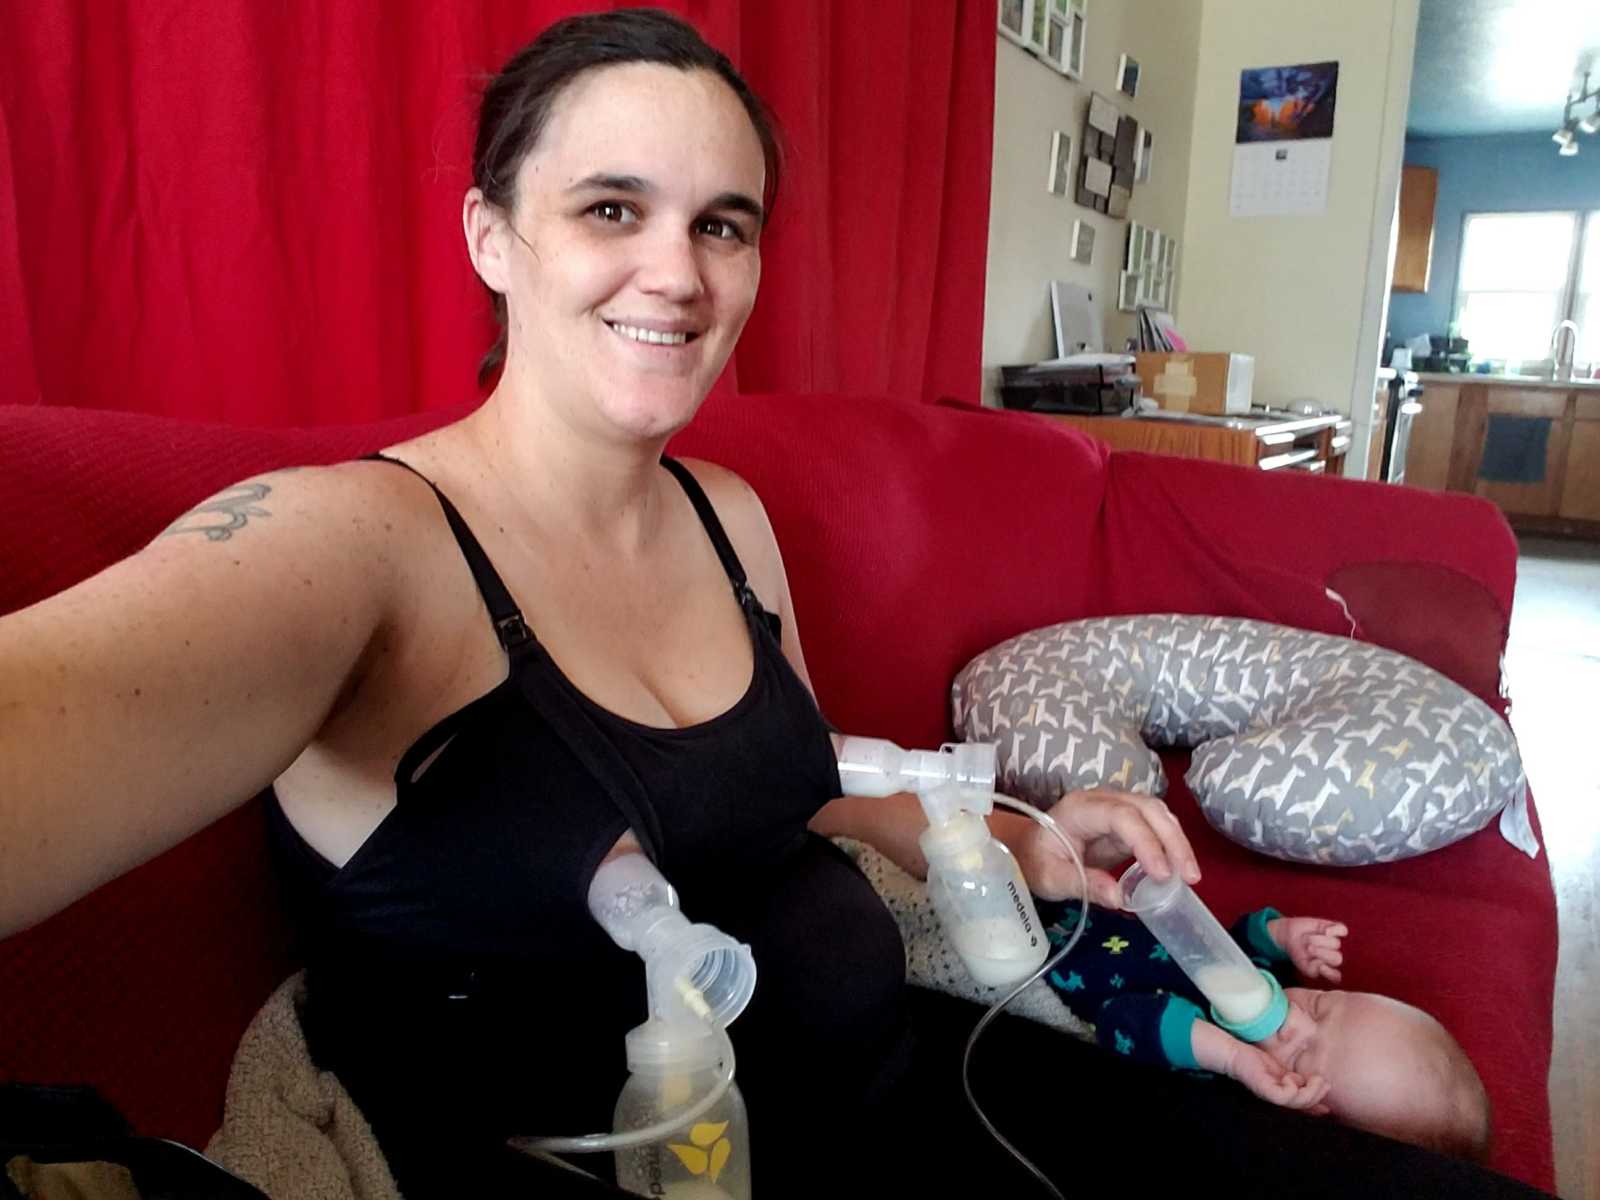 Woman takes selfie of her pumping milk while feeding her baby a bottle who is lying next to her on couch